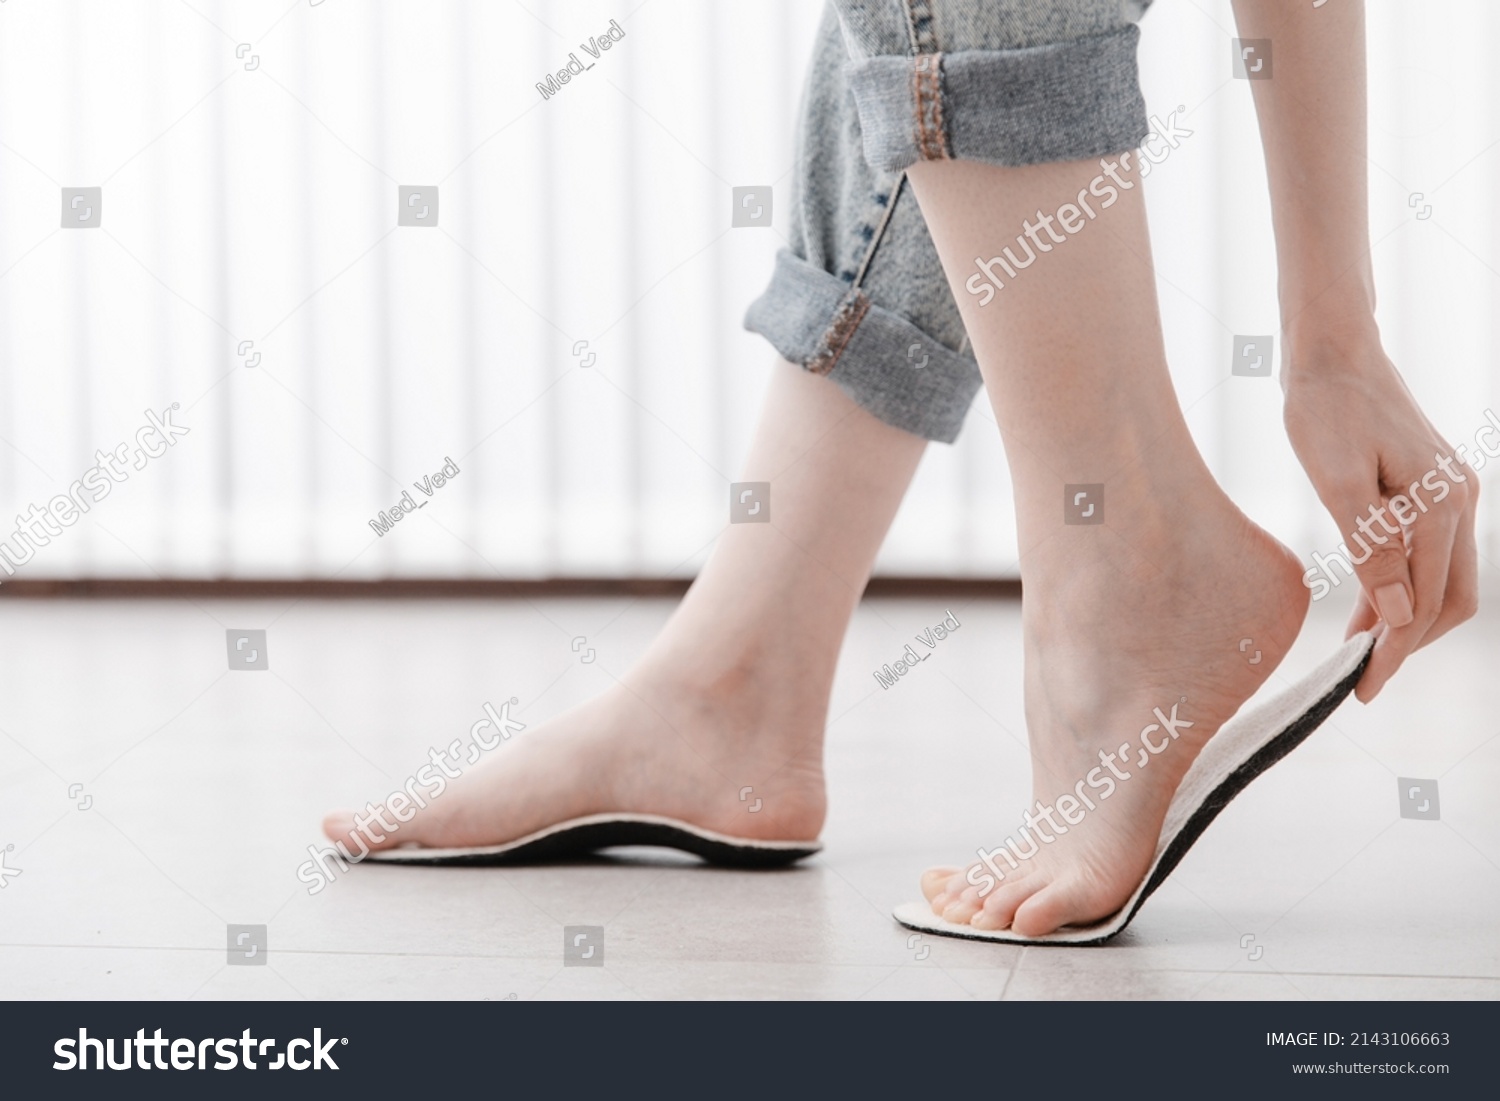 Woman fitting orthopedic insole indoors, close up. Girl holding an insole next to foot at home. Orthopedic insoles. Foot care banner. Flat Feet Correction. Treatment and prevention of foot diseases. #2143106663